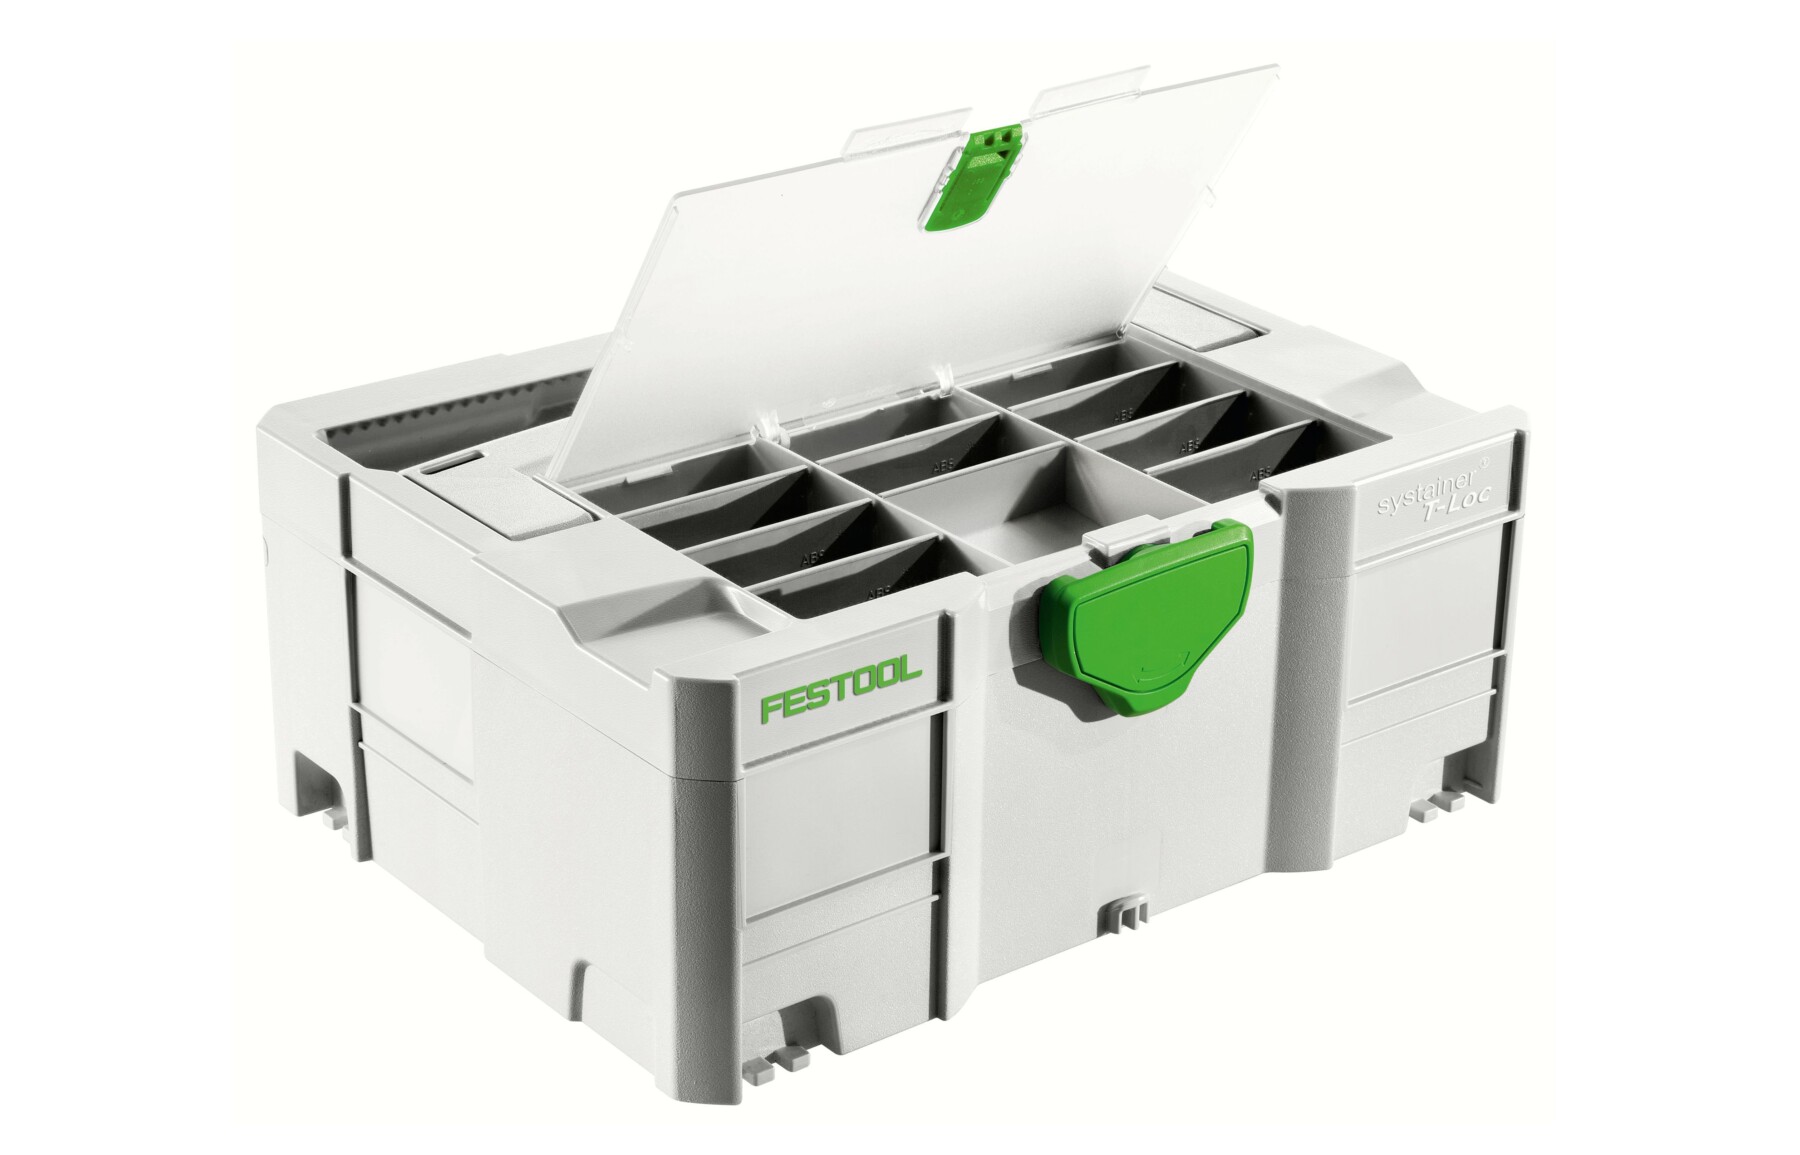 FESTOOL Systainer T-LOC SORT-SYS DOMINO498889